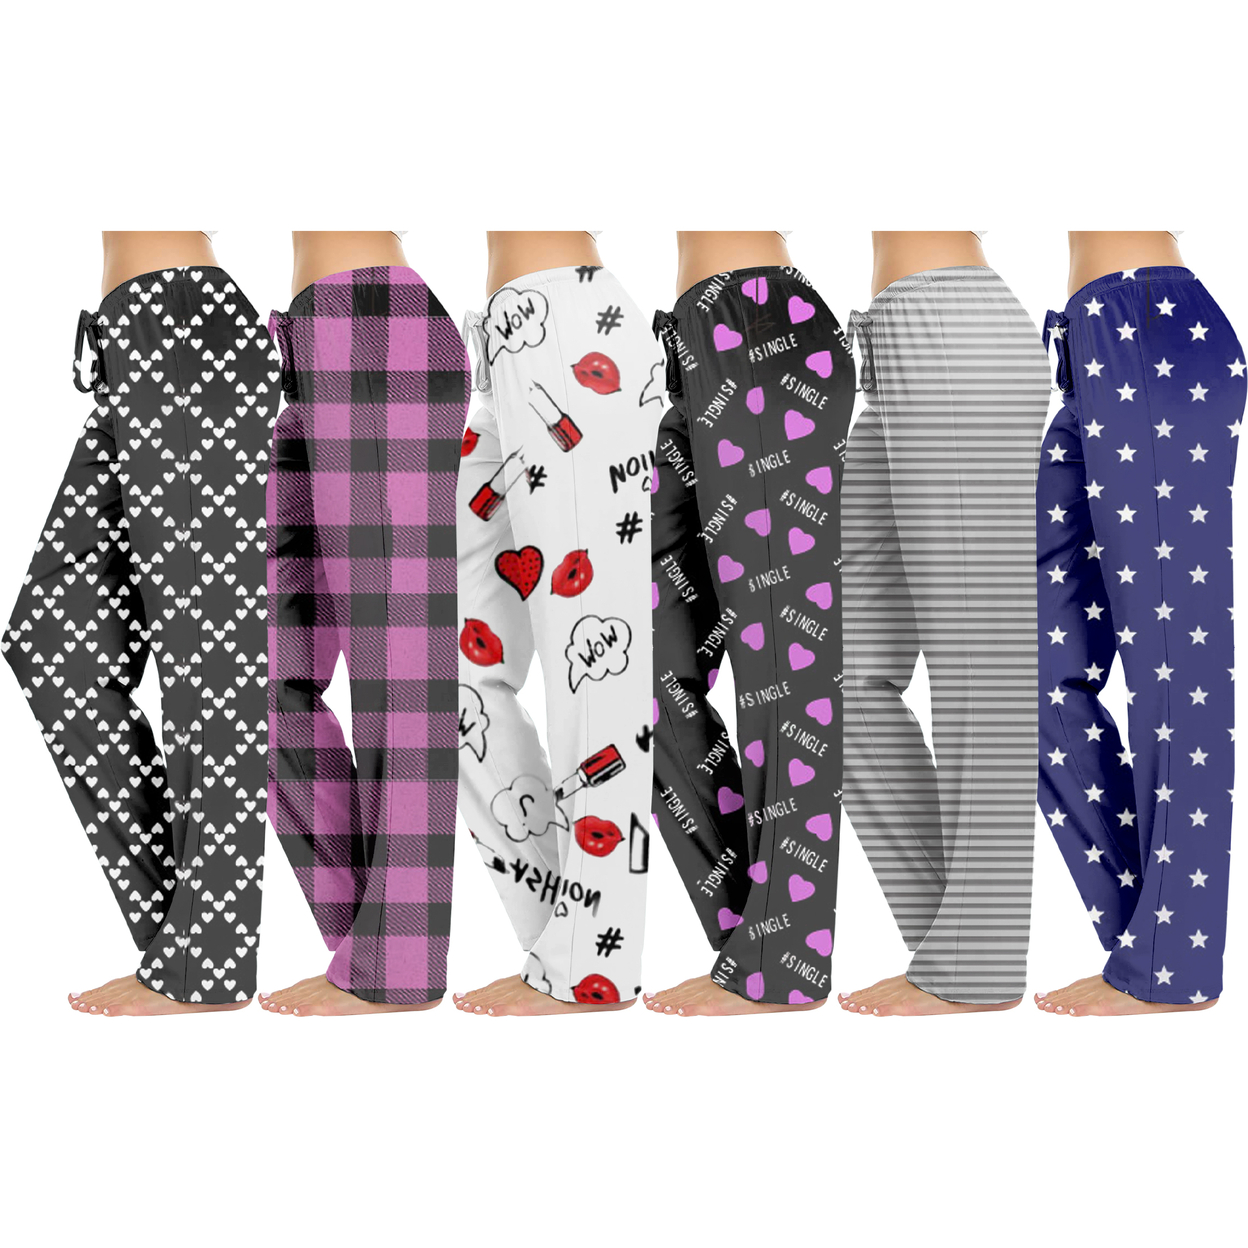 5-Pack: Women's Casual Fun Printed Lightweight Lounge Terry Knit Pajama Bottom Pants - X-large, Shapes